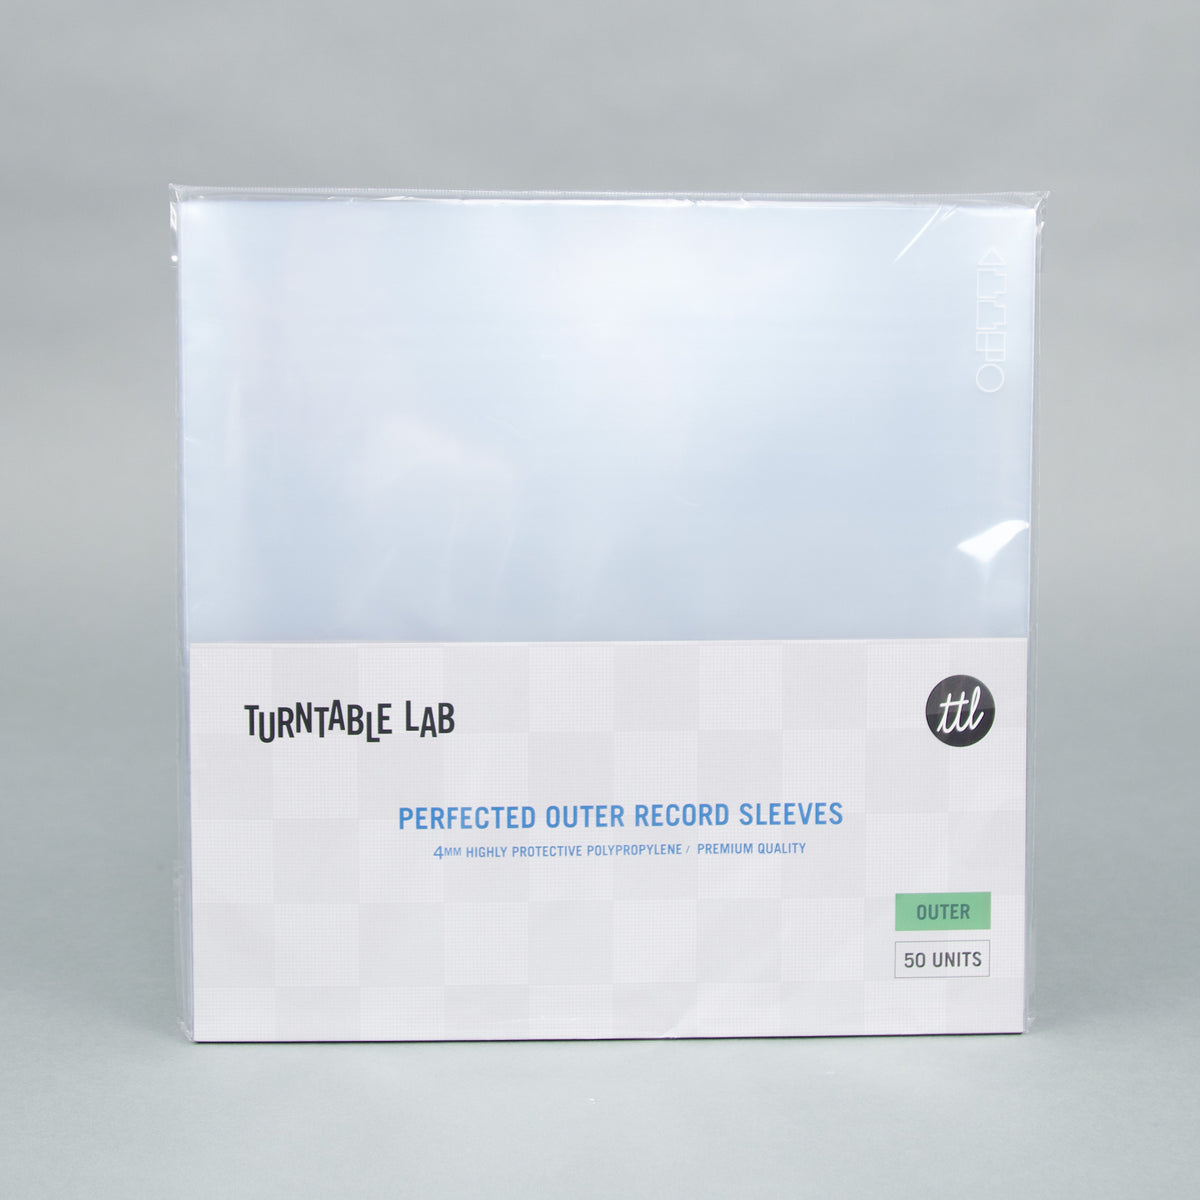 Turntable Lab: Perfected Outer Record Sleeves + FREE 50 Inner Sleeves